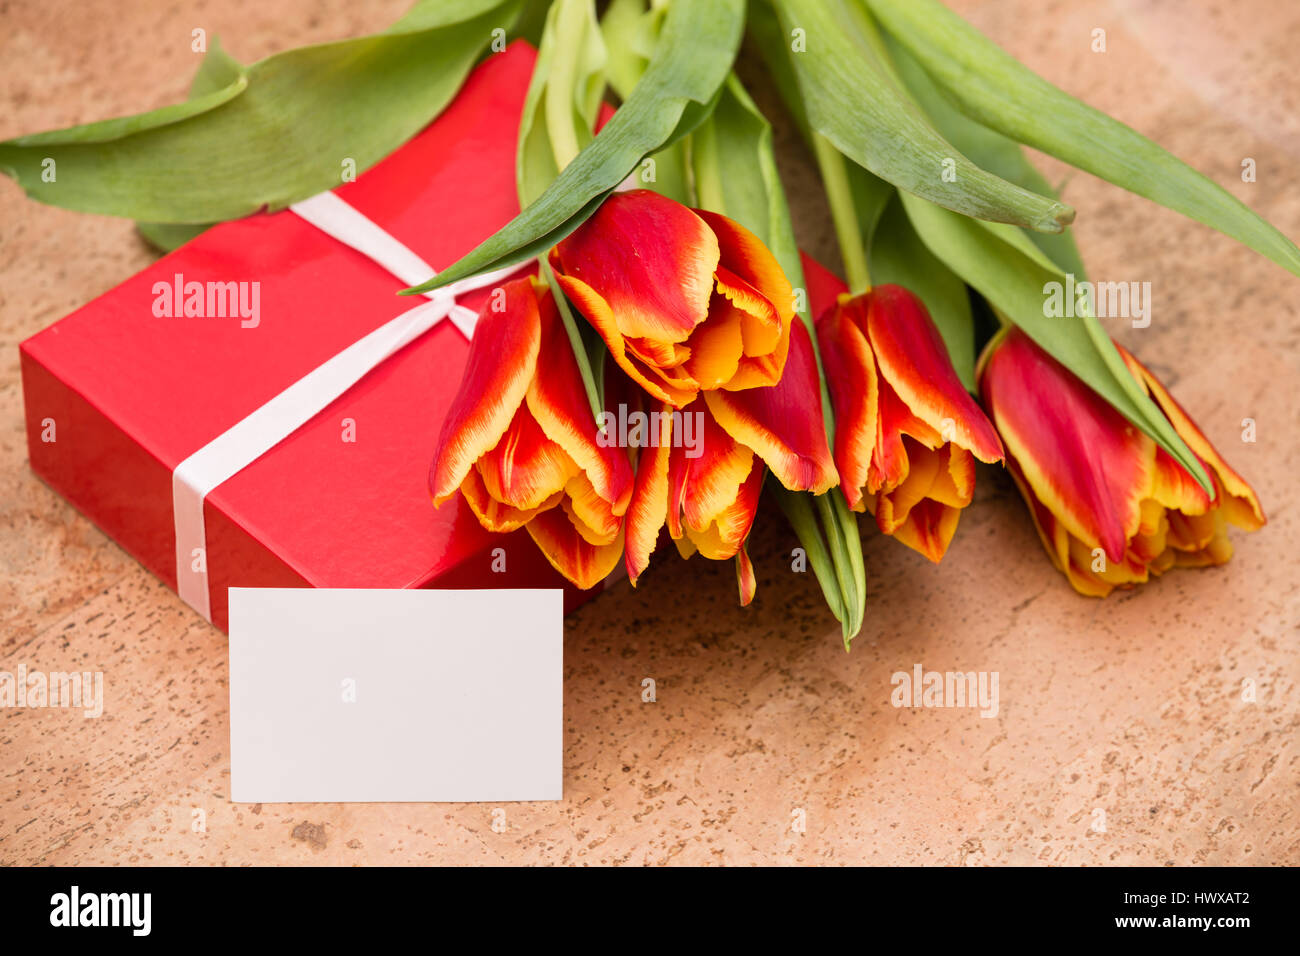 The tulips and gift box on a cork floor Stock Photo